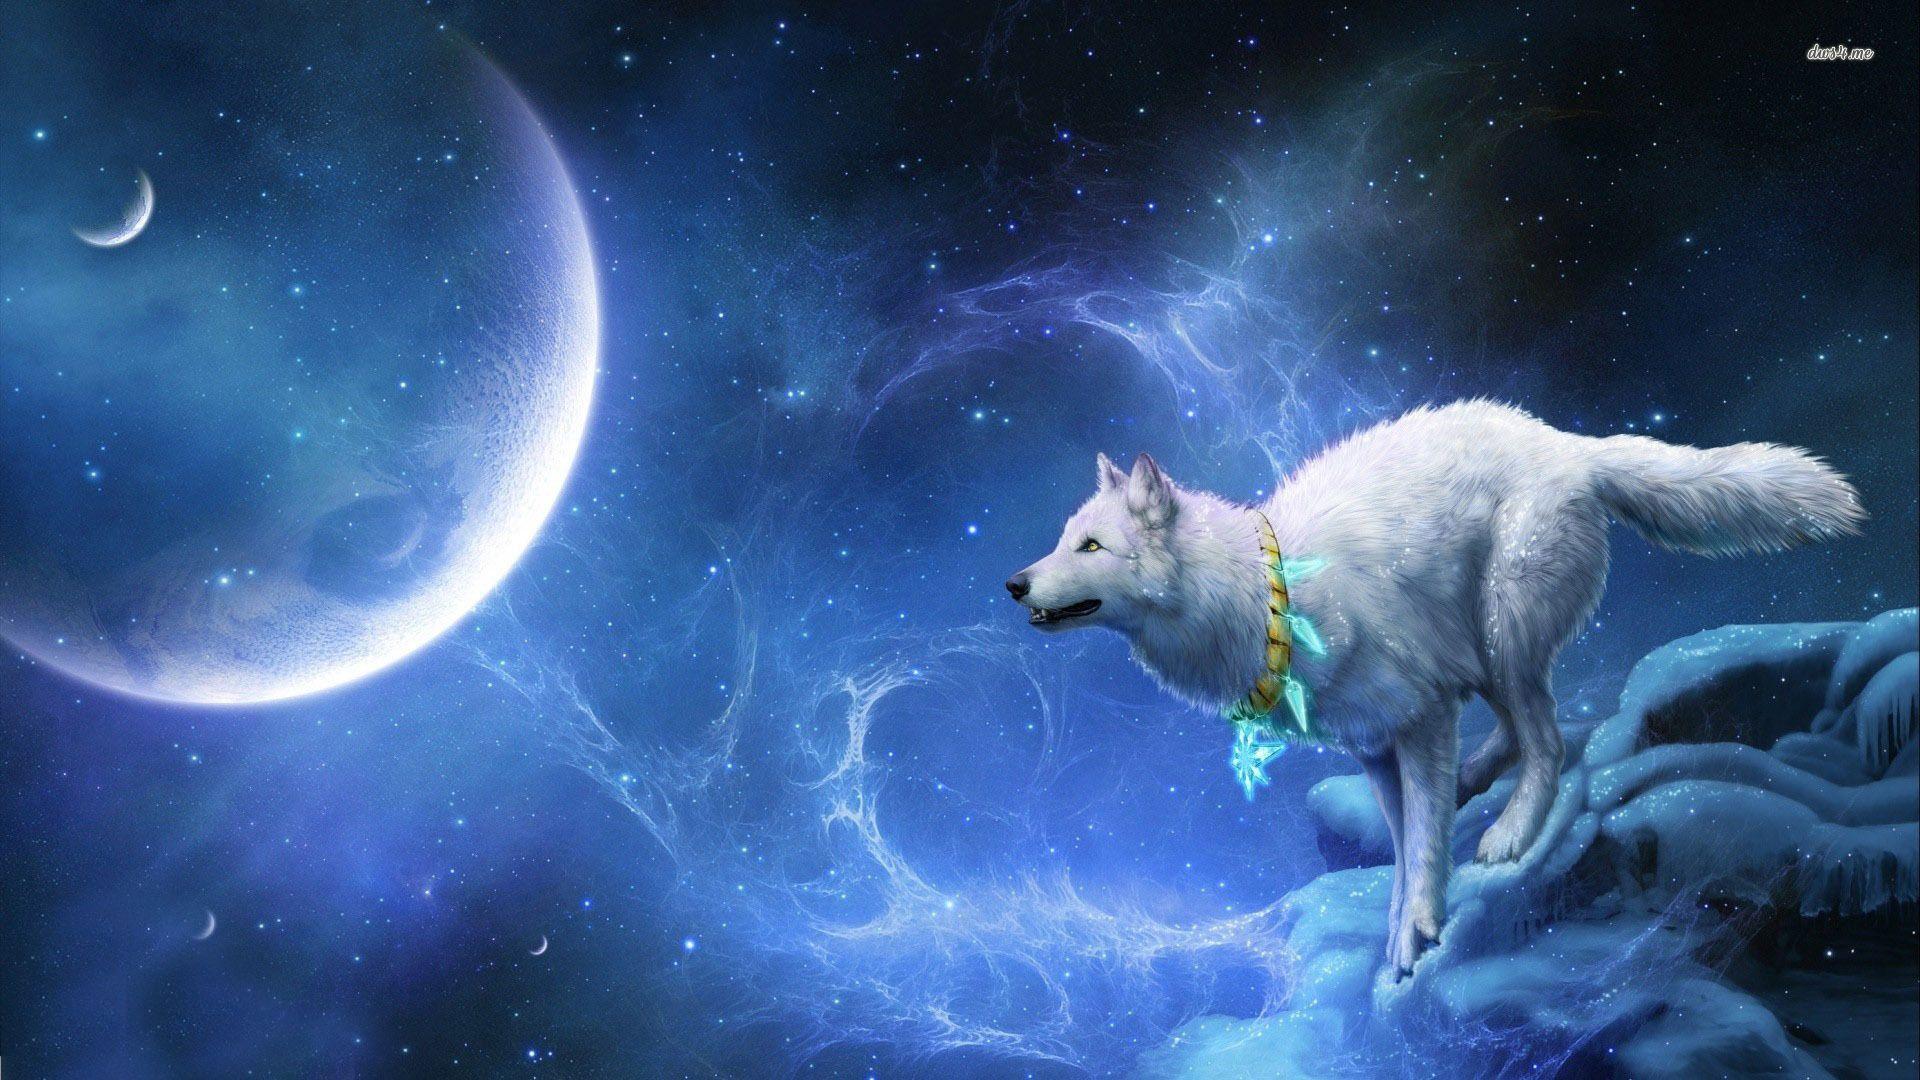 Cute Galaxy Wolf Wallpapers Wallpapers